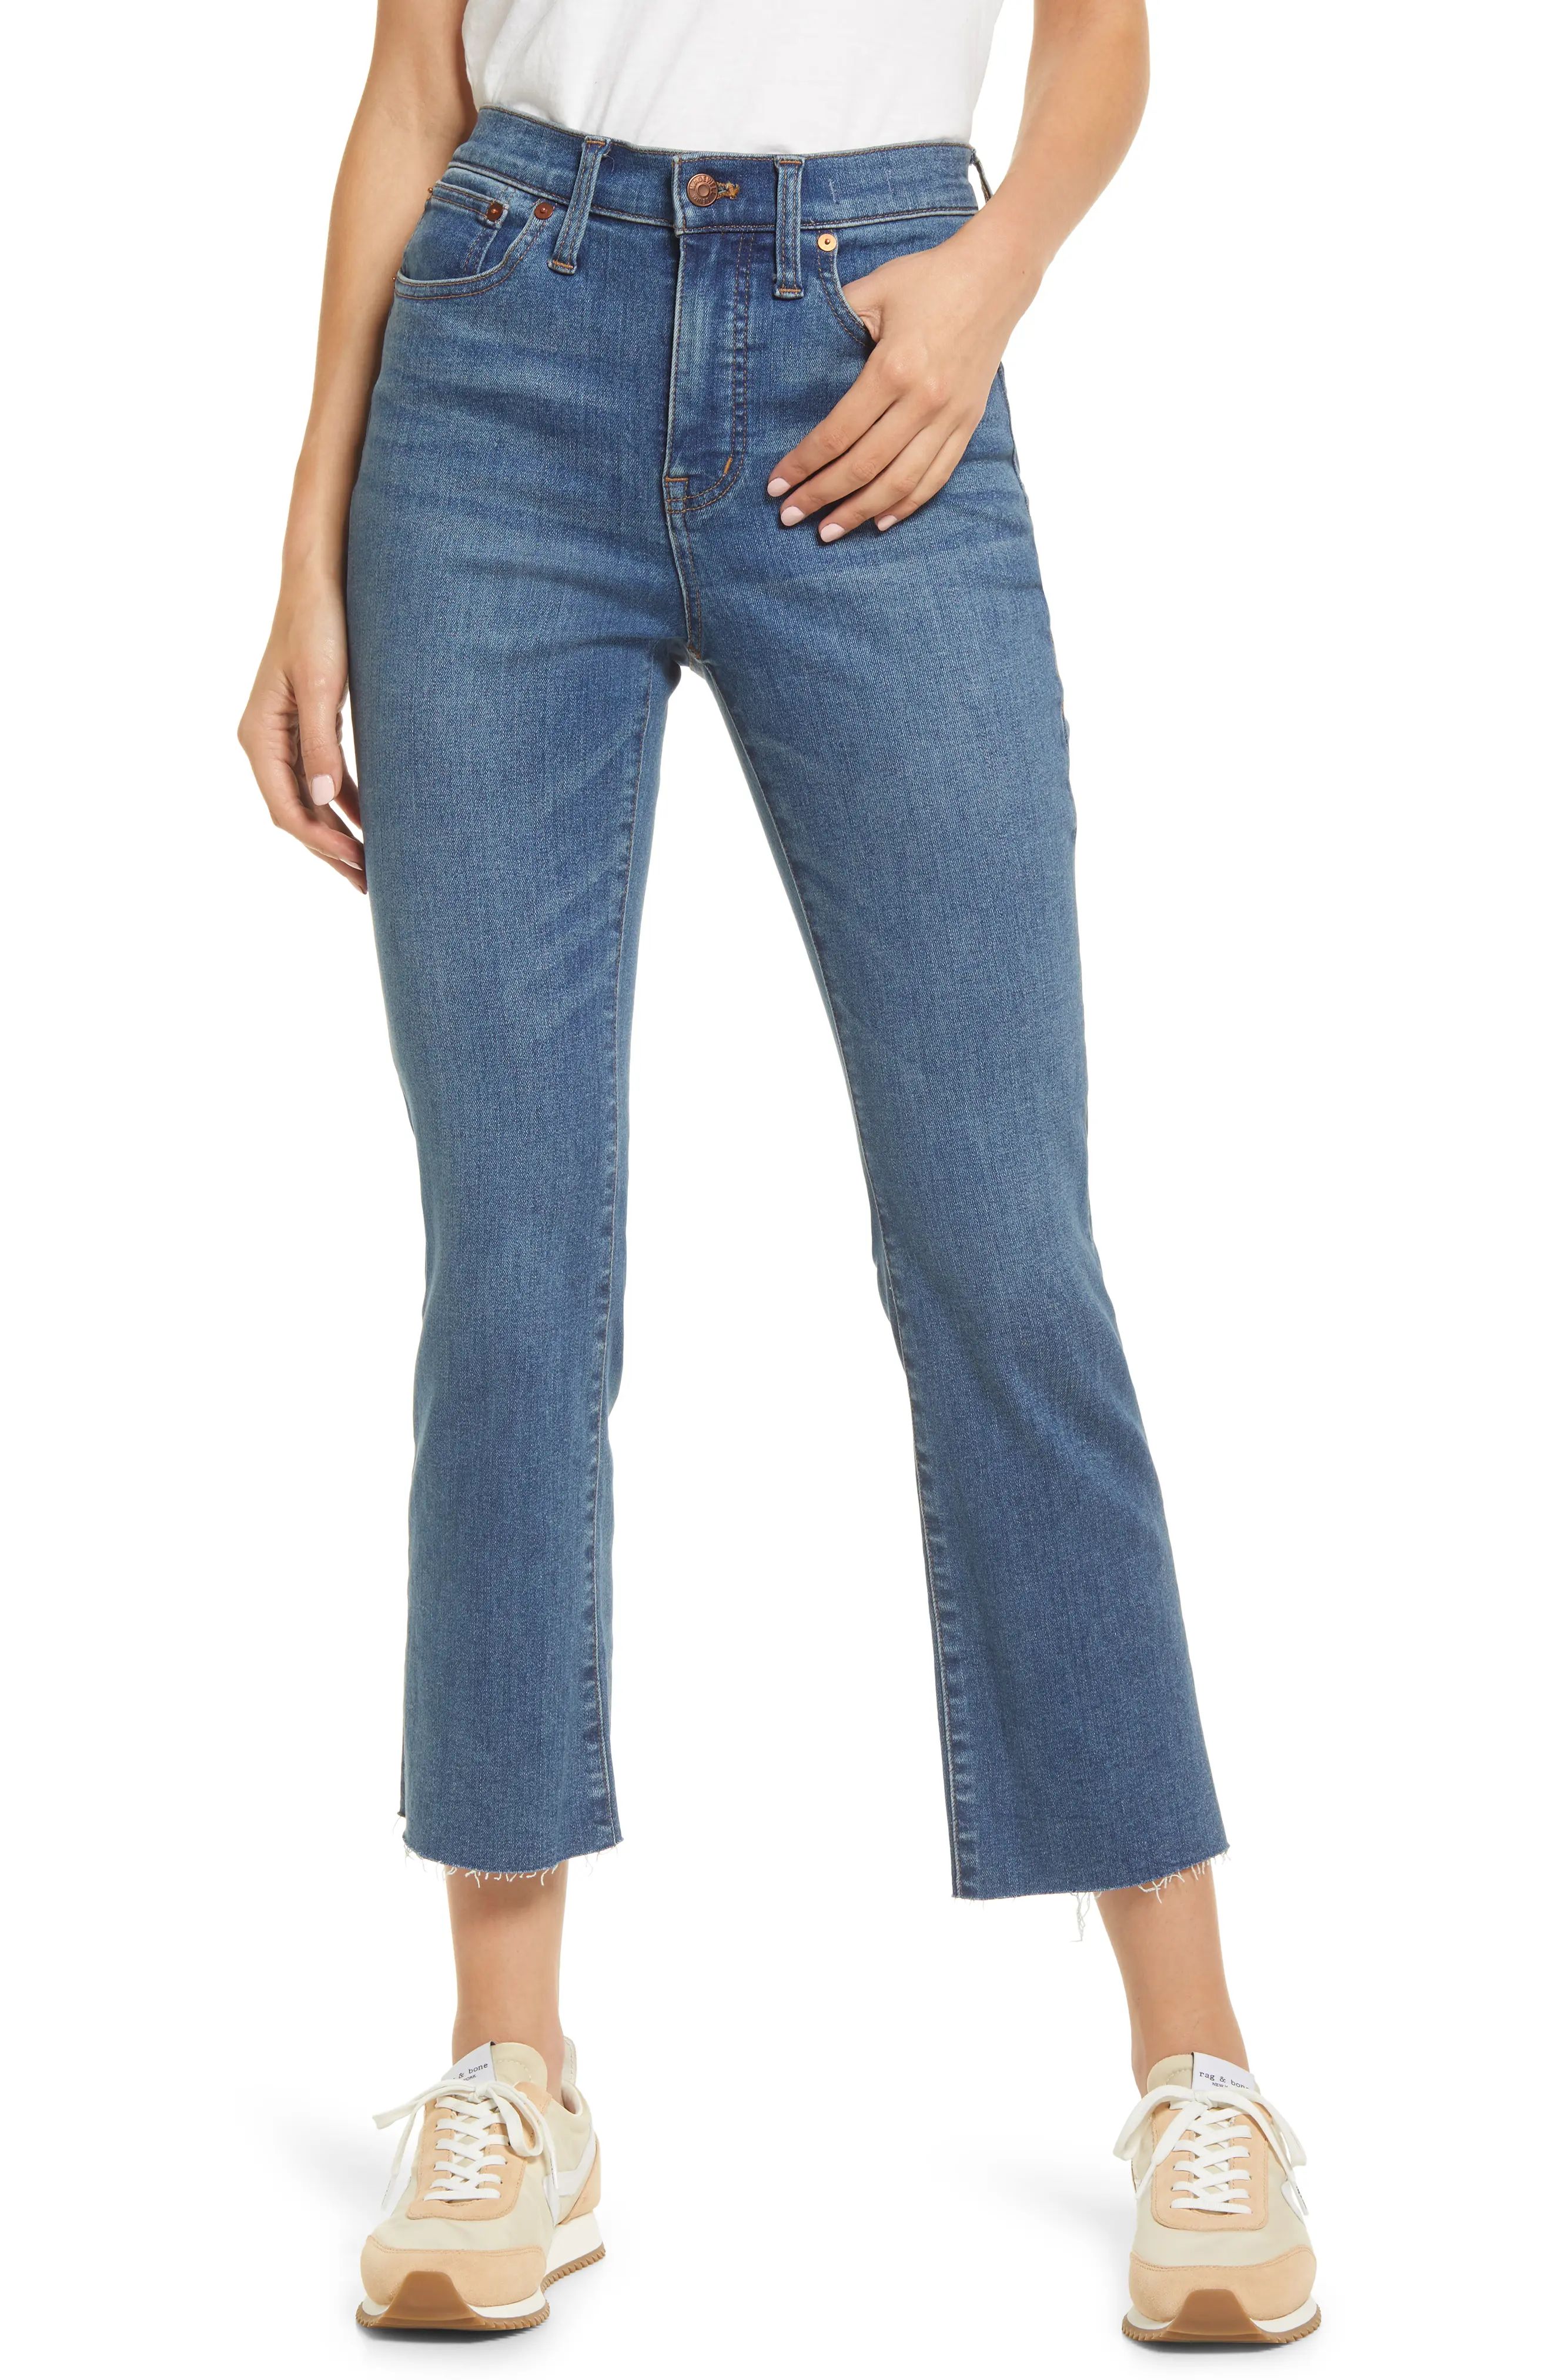 Madewell Cali High Waist Crop Demi Boot Jeans in Halsted at Nordstrom, Size 26 | Nordstrom